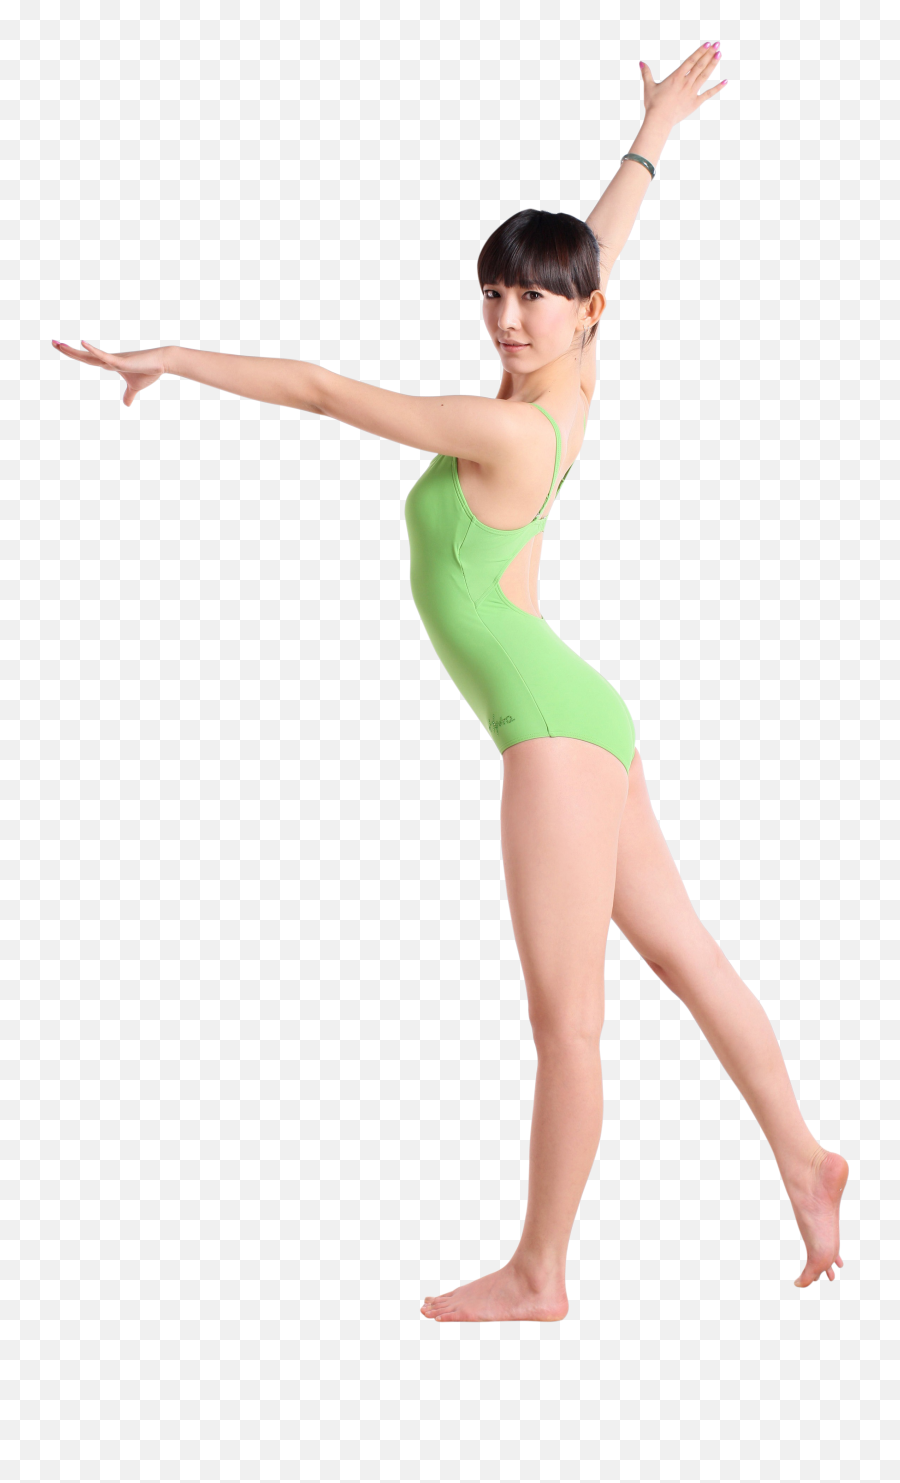 Png Images Premium Collection - Dance,Gymnast Png